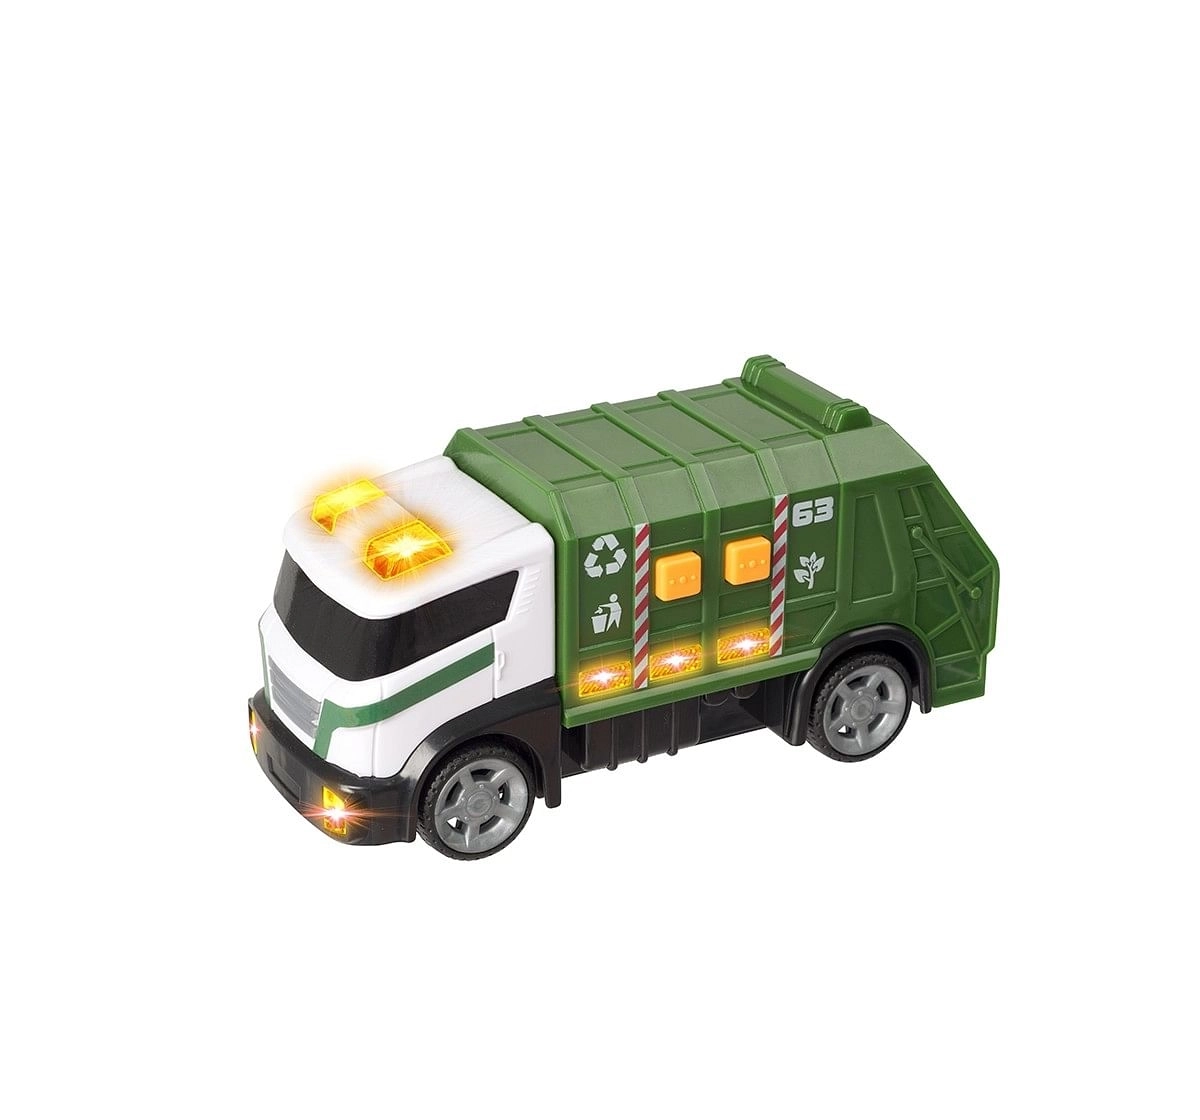 Teamsterz Light And Sound Garbage Truck Small Vehicles for Kids age 3Y+ 